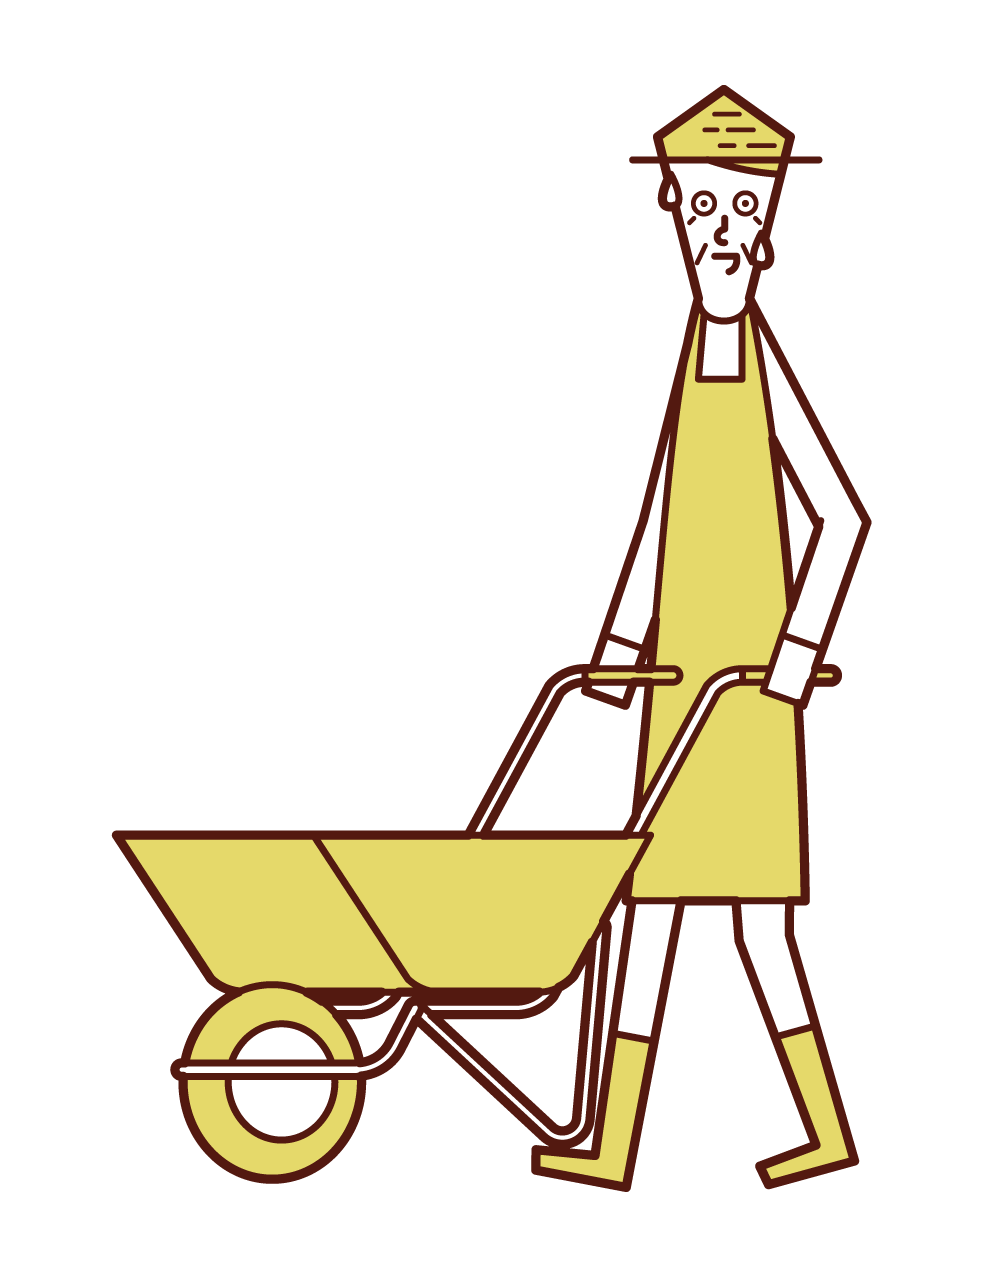 Illustration of a man (old man) using a wheeled unicycle